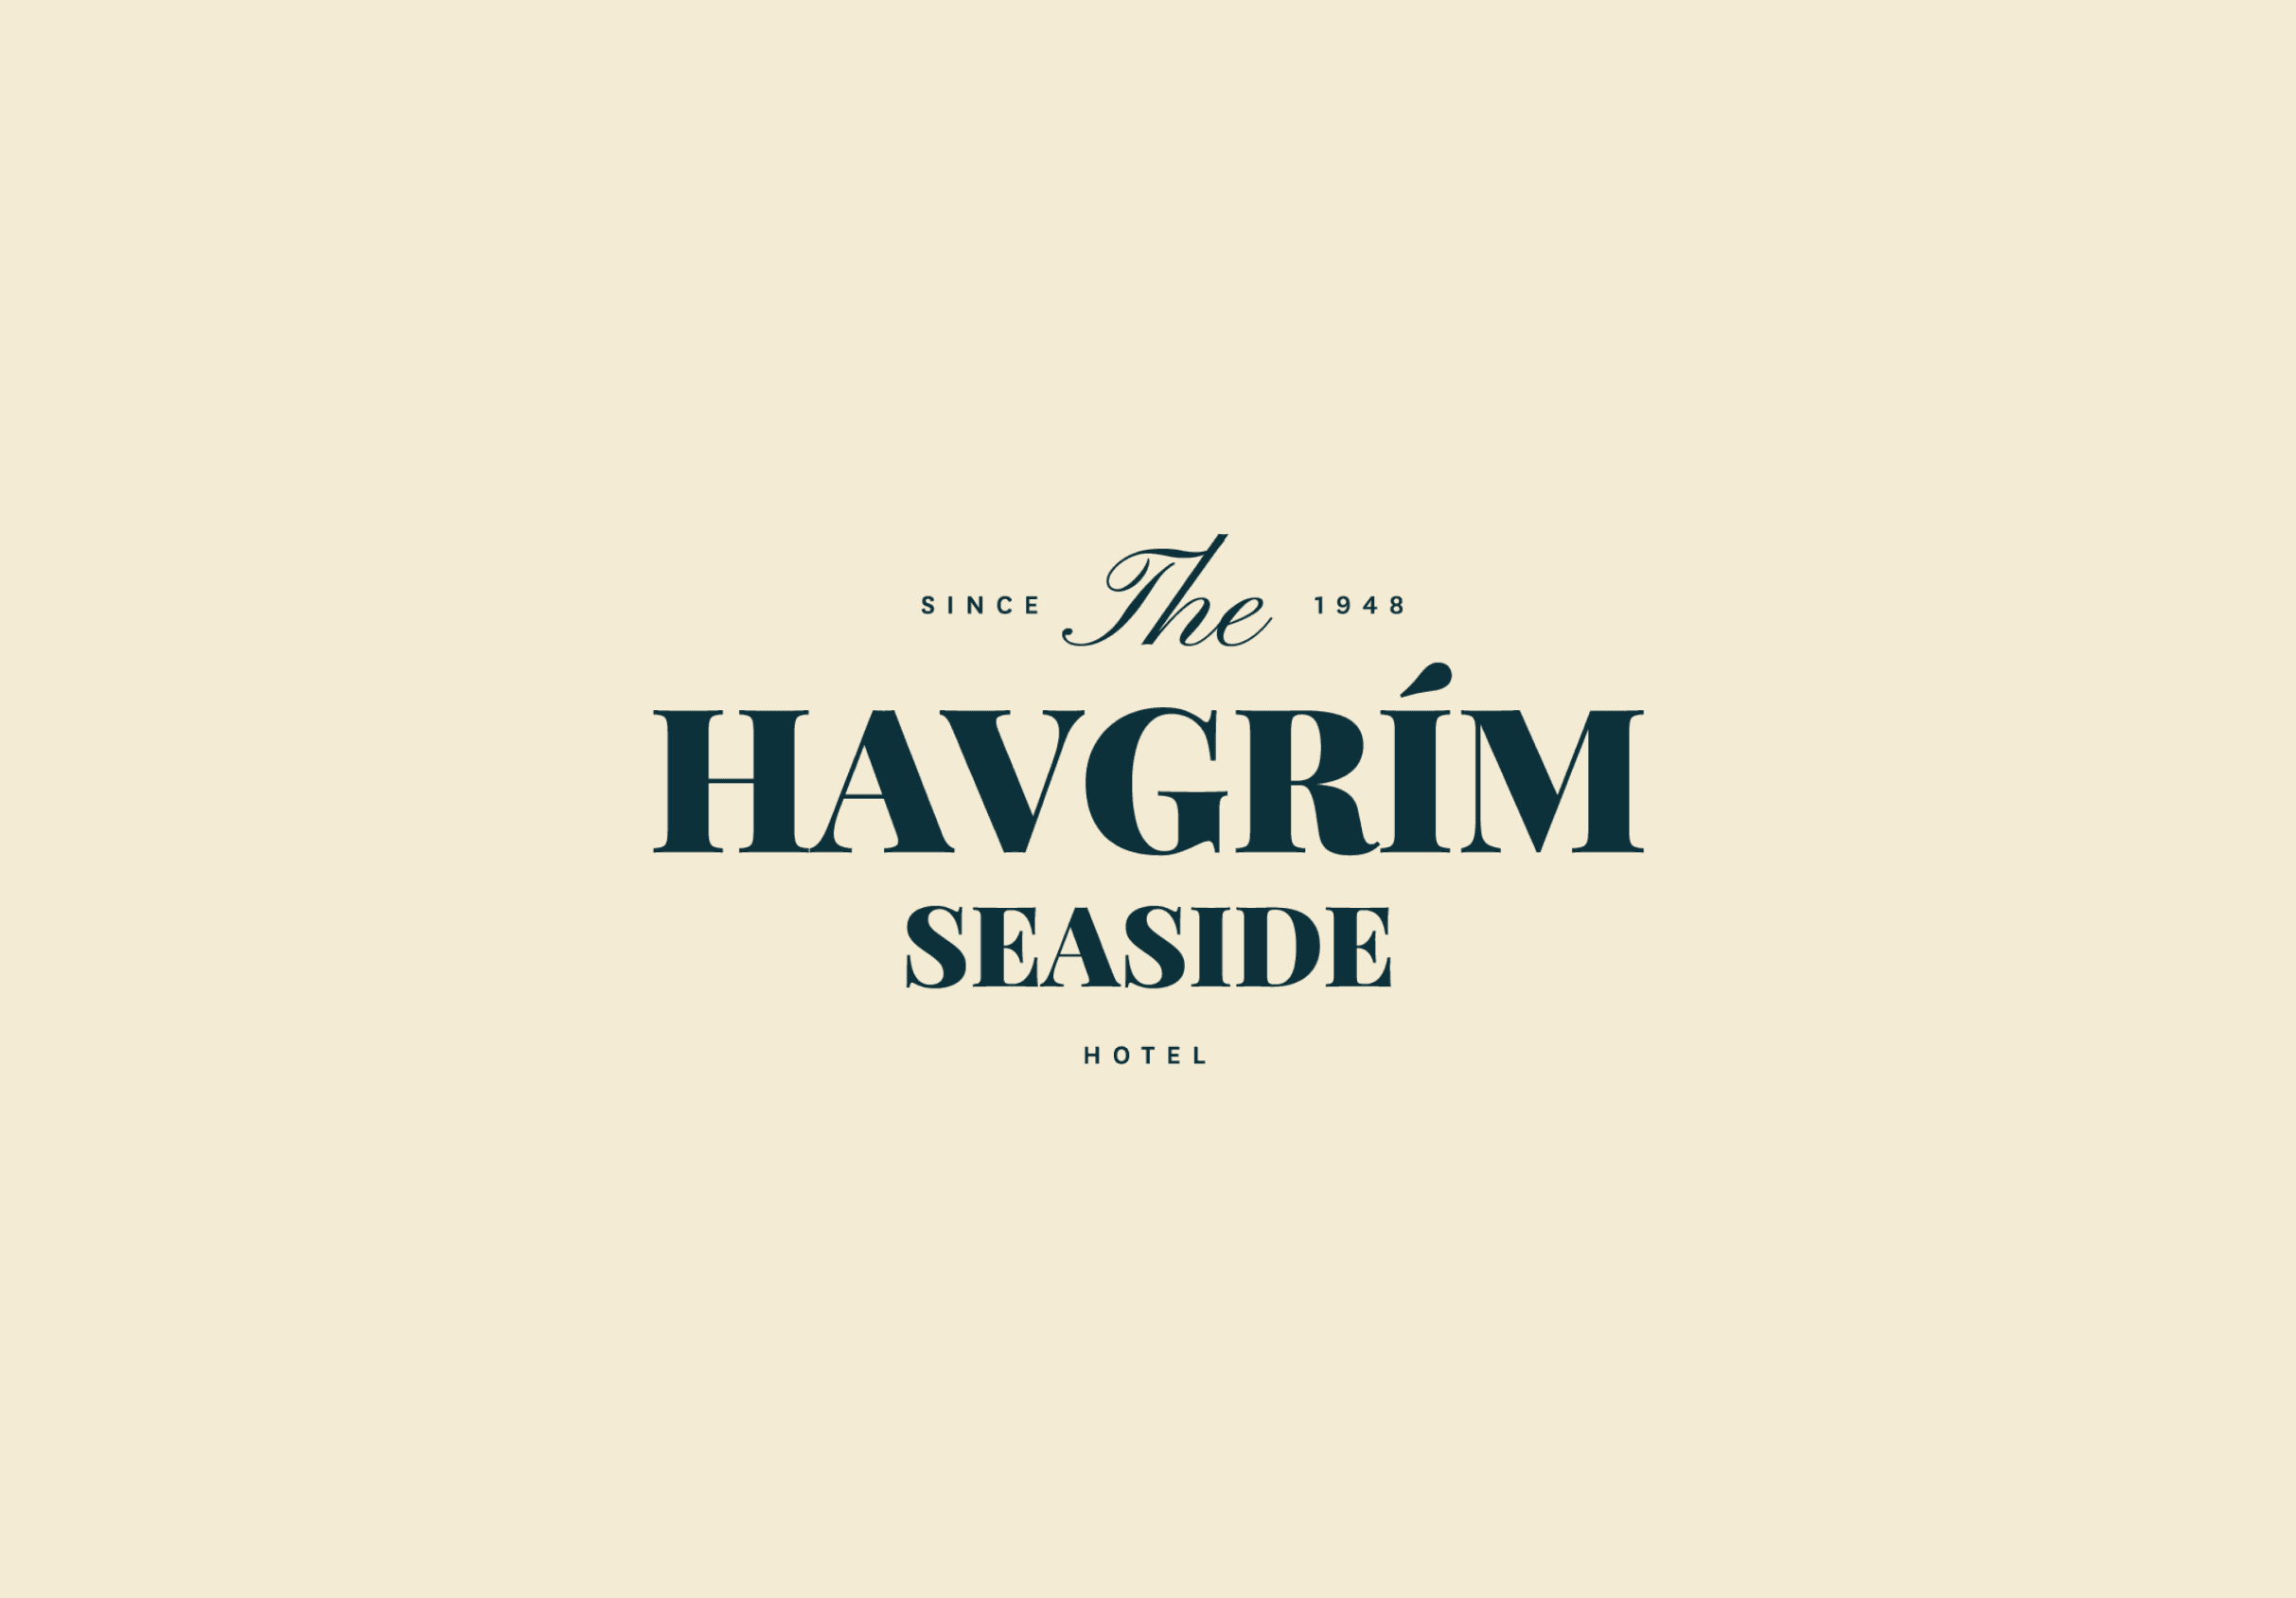 Nestled in the captivating landscapes of the Faroe Islands, the Havgrim Hotel branding captures the essence of tradition and timeless elegance. With its classic light color palette and refined typography, it evokes a sense of heritage.